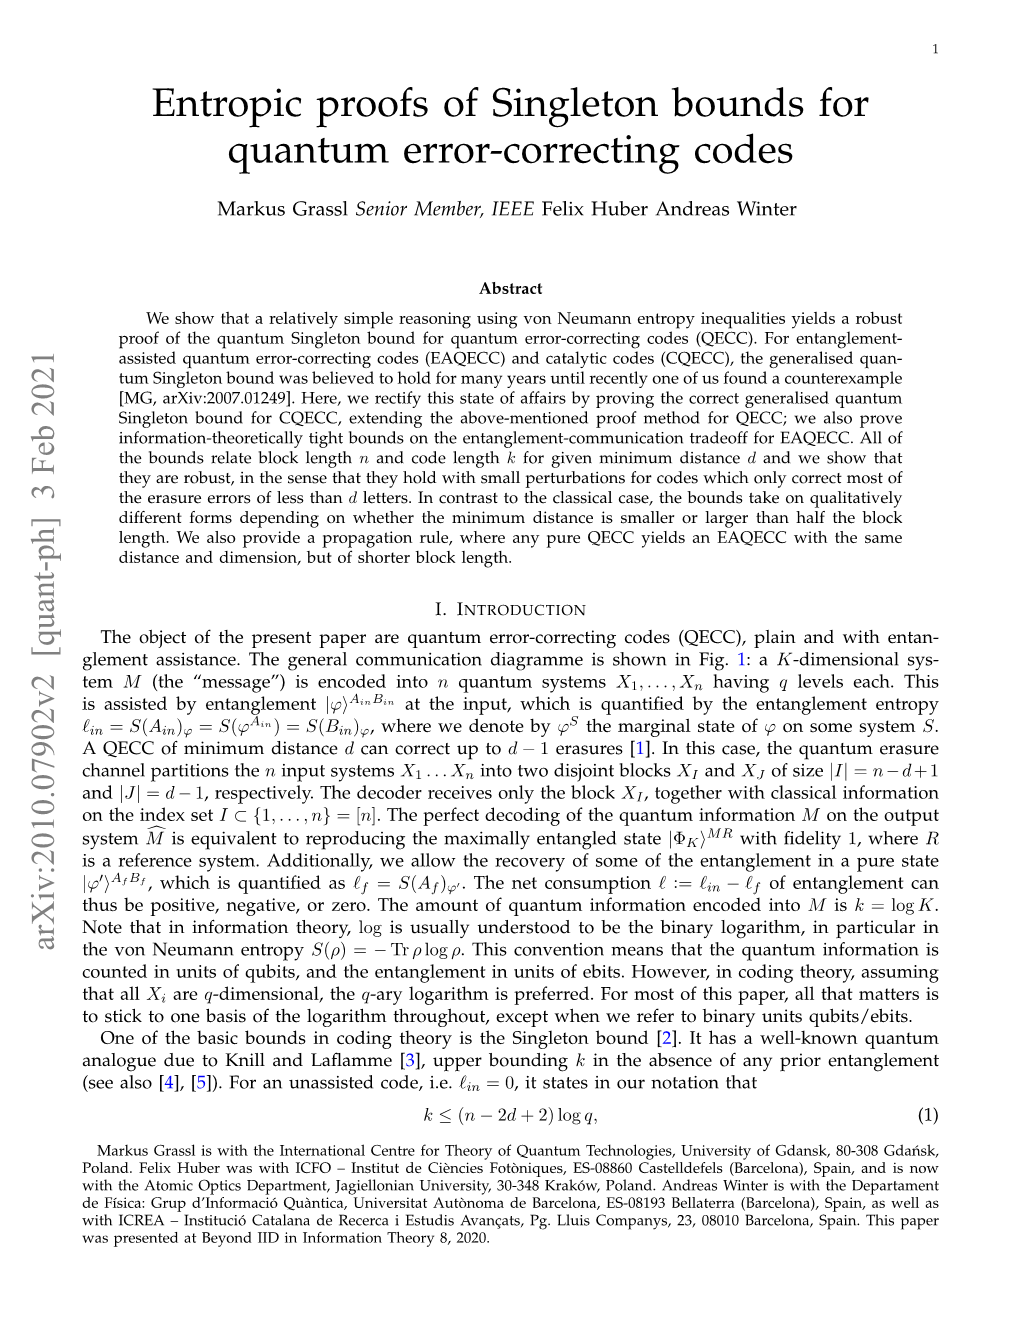 Entropic Proofs of Singleton Bounds for Quantum Error-Correcting Codes